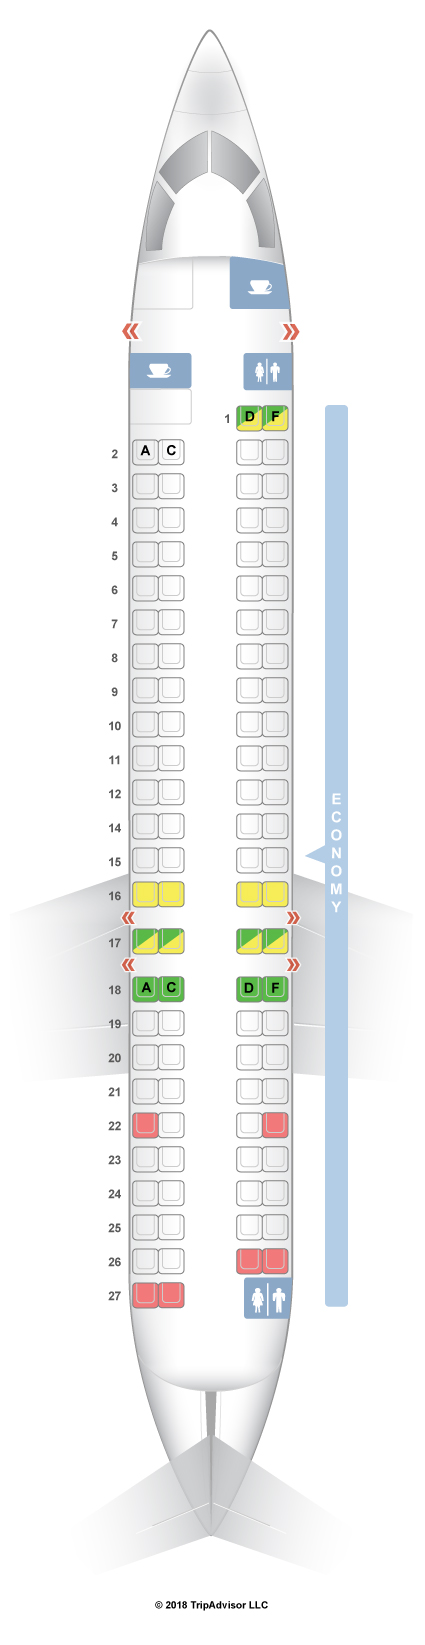 seat assignments on iberia